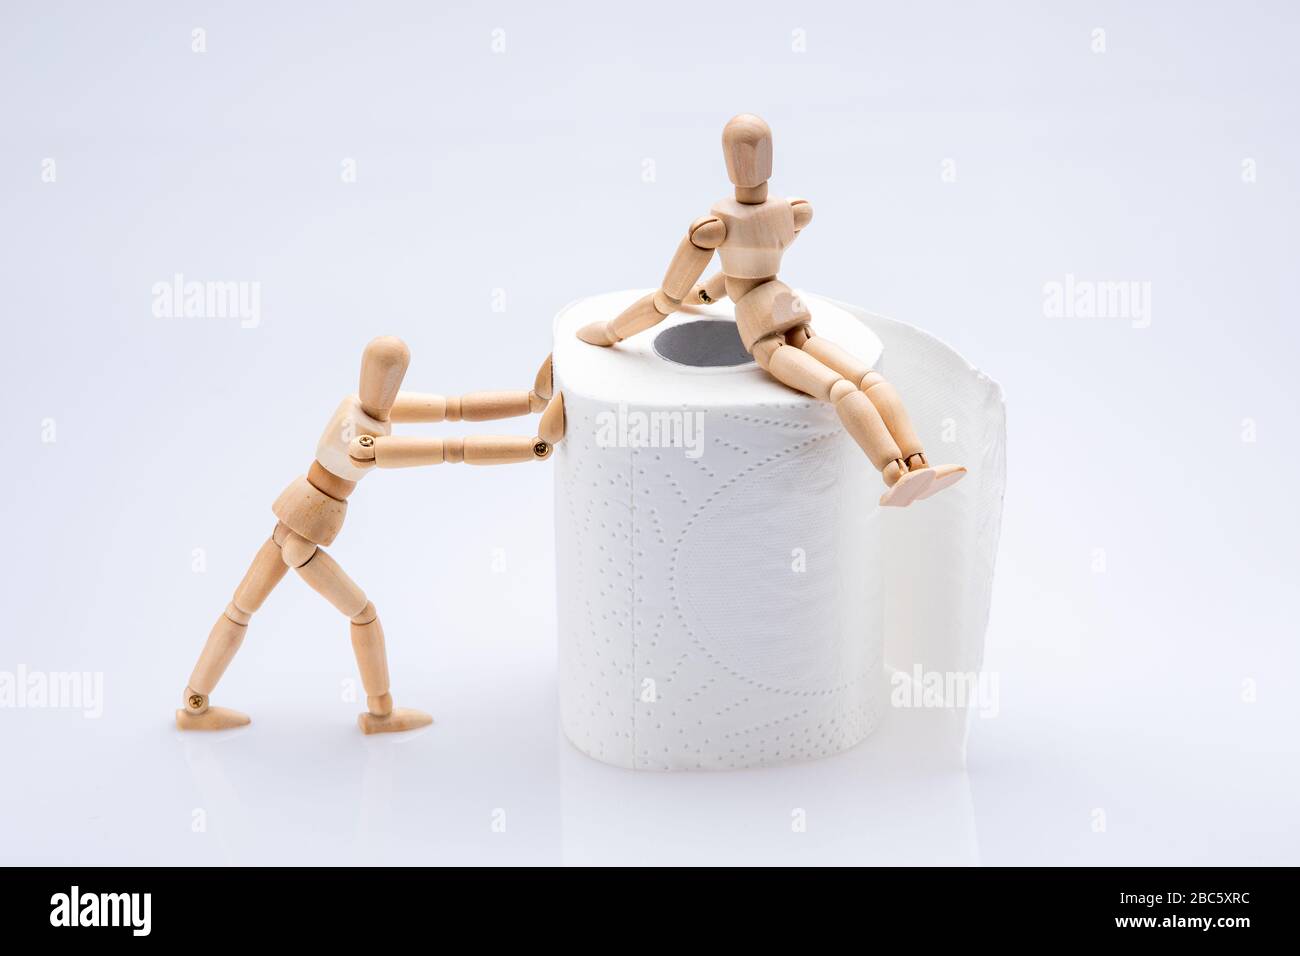 Wooden people working with a white toilet roll paper isolated in front of a white background, one of them sits on the roller while the other pushes it Stock Photo